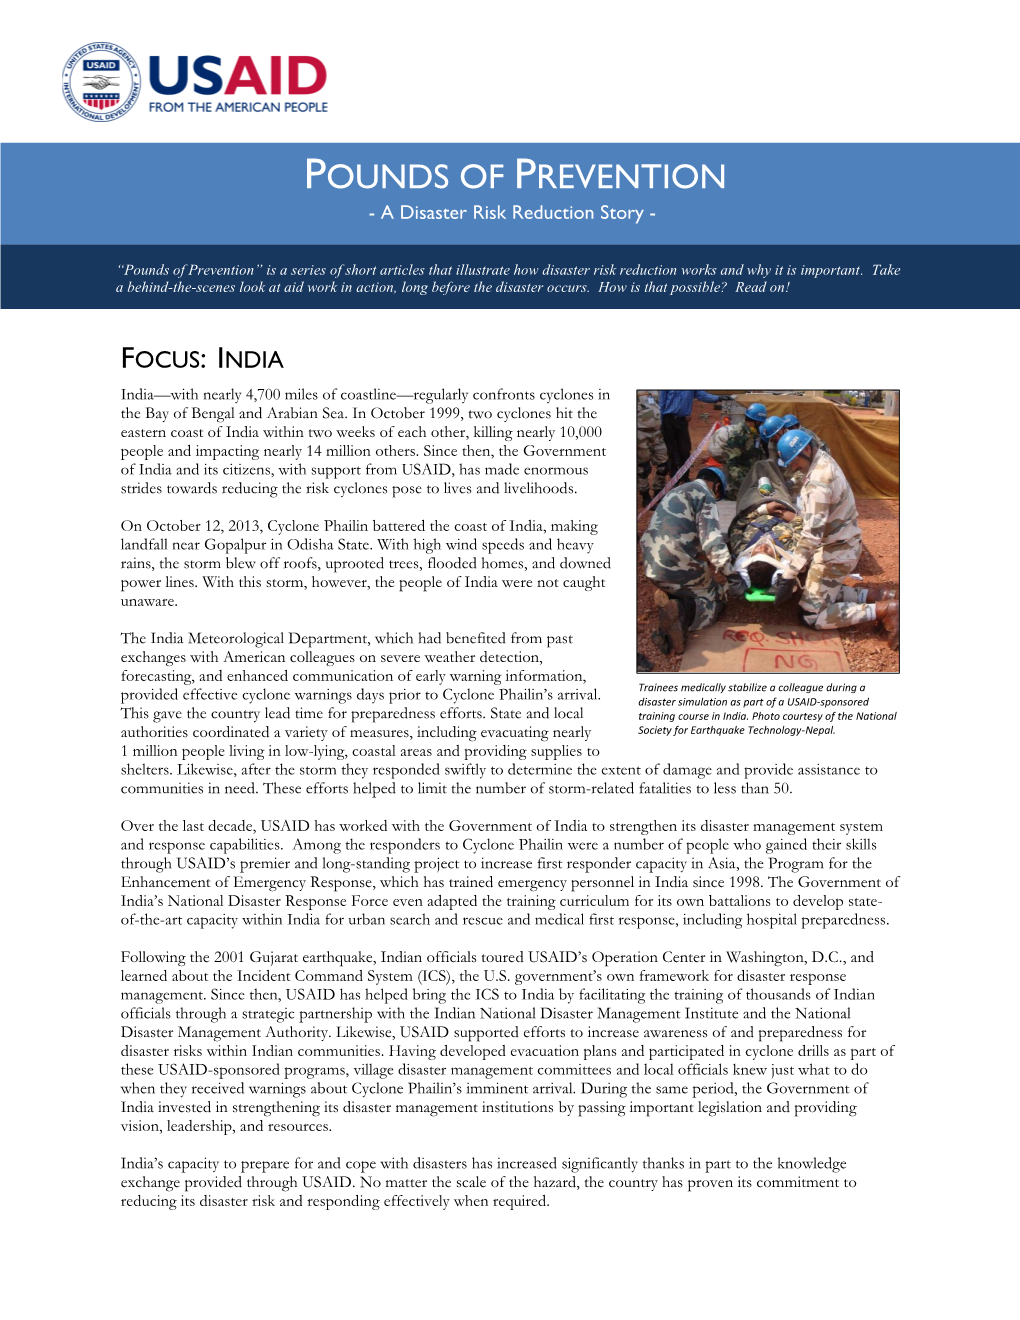 POUNDS of PREVENTION - a Disaster Risk Reduction Story